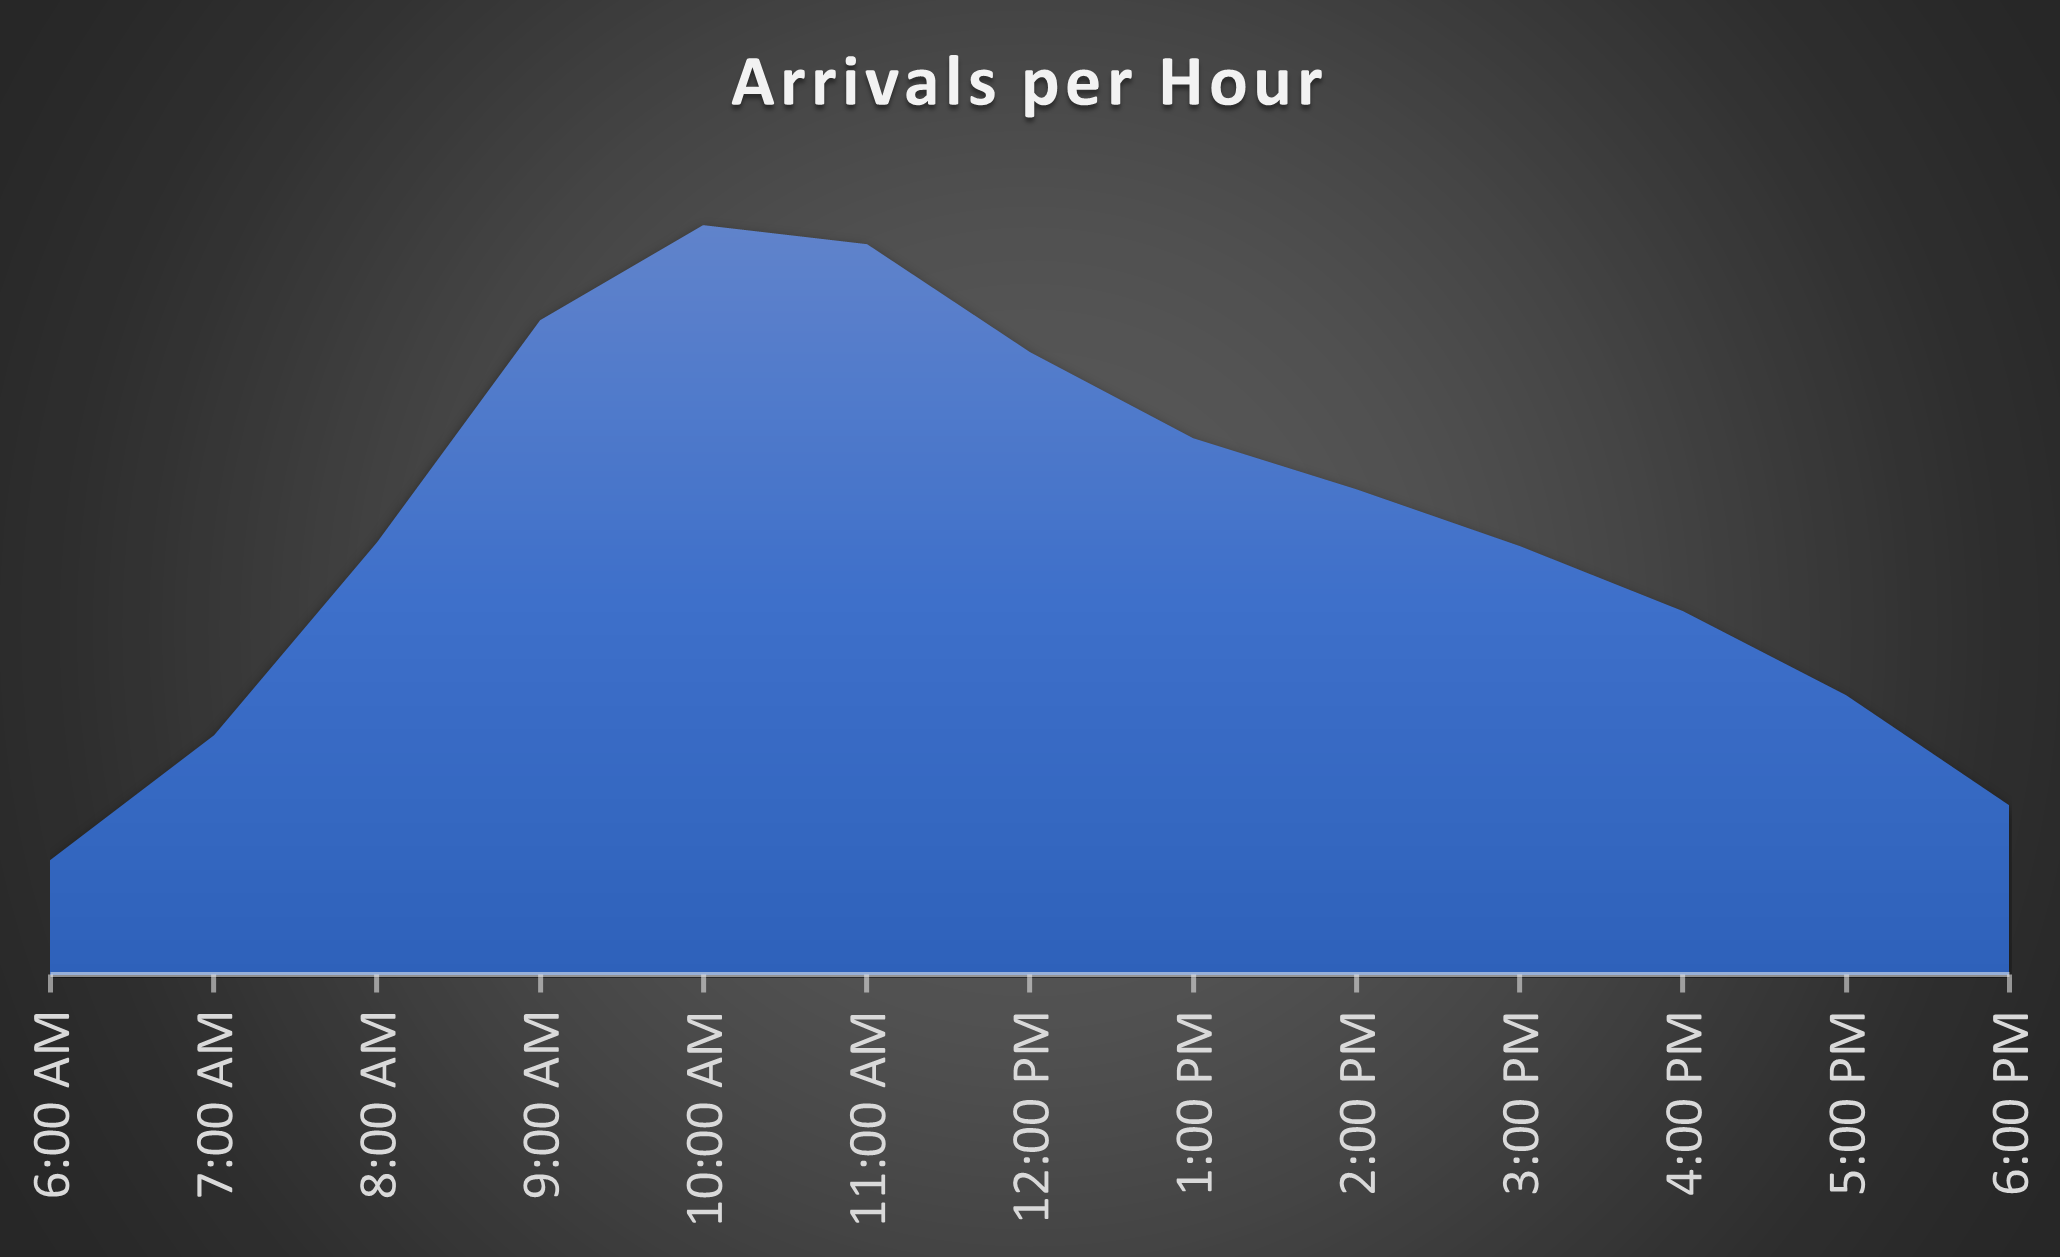 Graph showing hours of the day on the x (horizontal)axis and vehicle arrivals on the y (vertical) axis. Peak arrival time is between 10 and 11 AM.